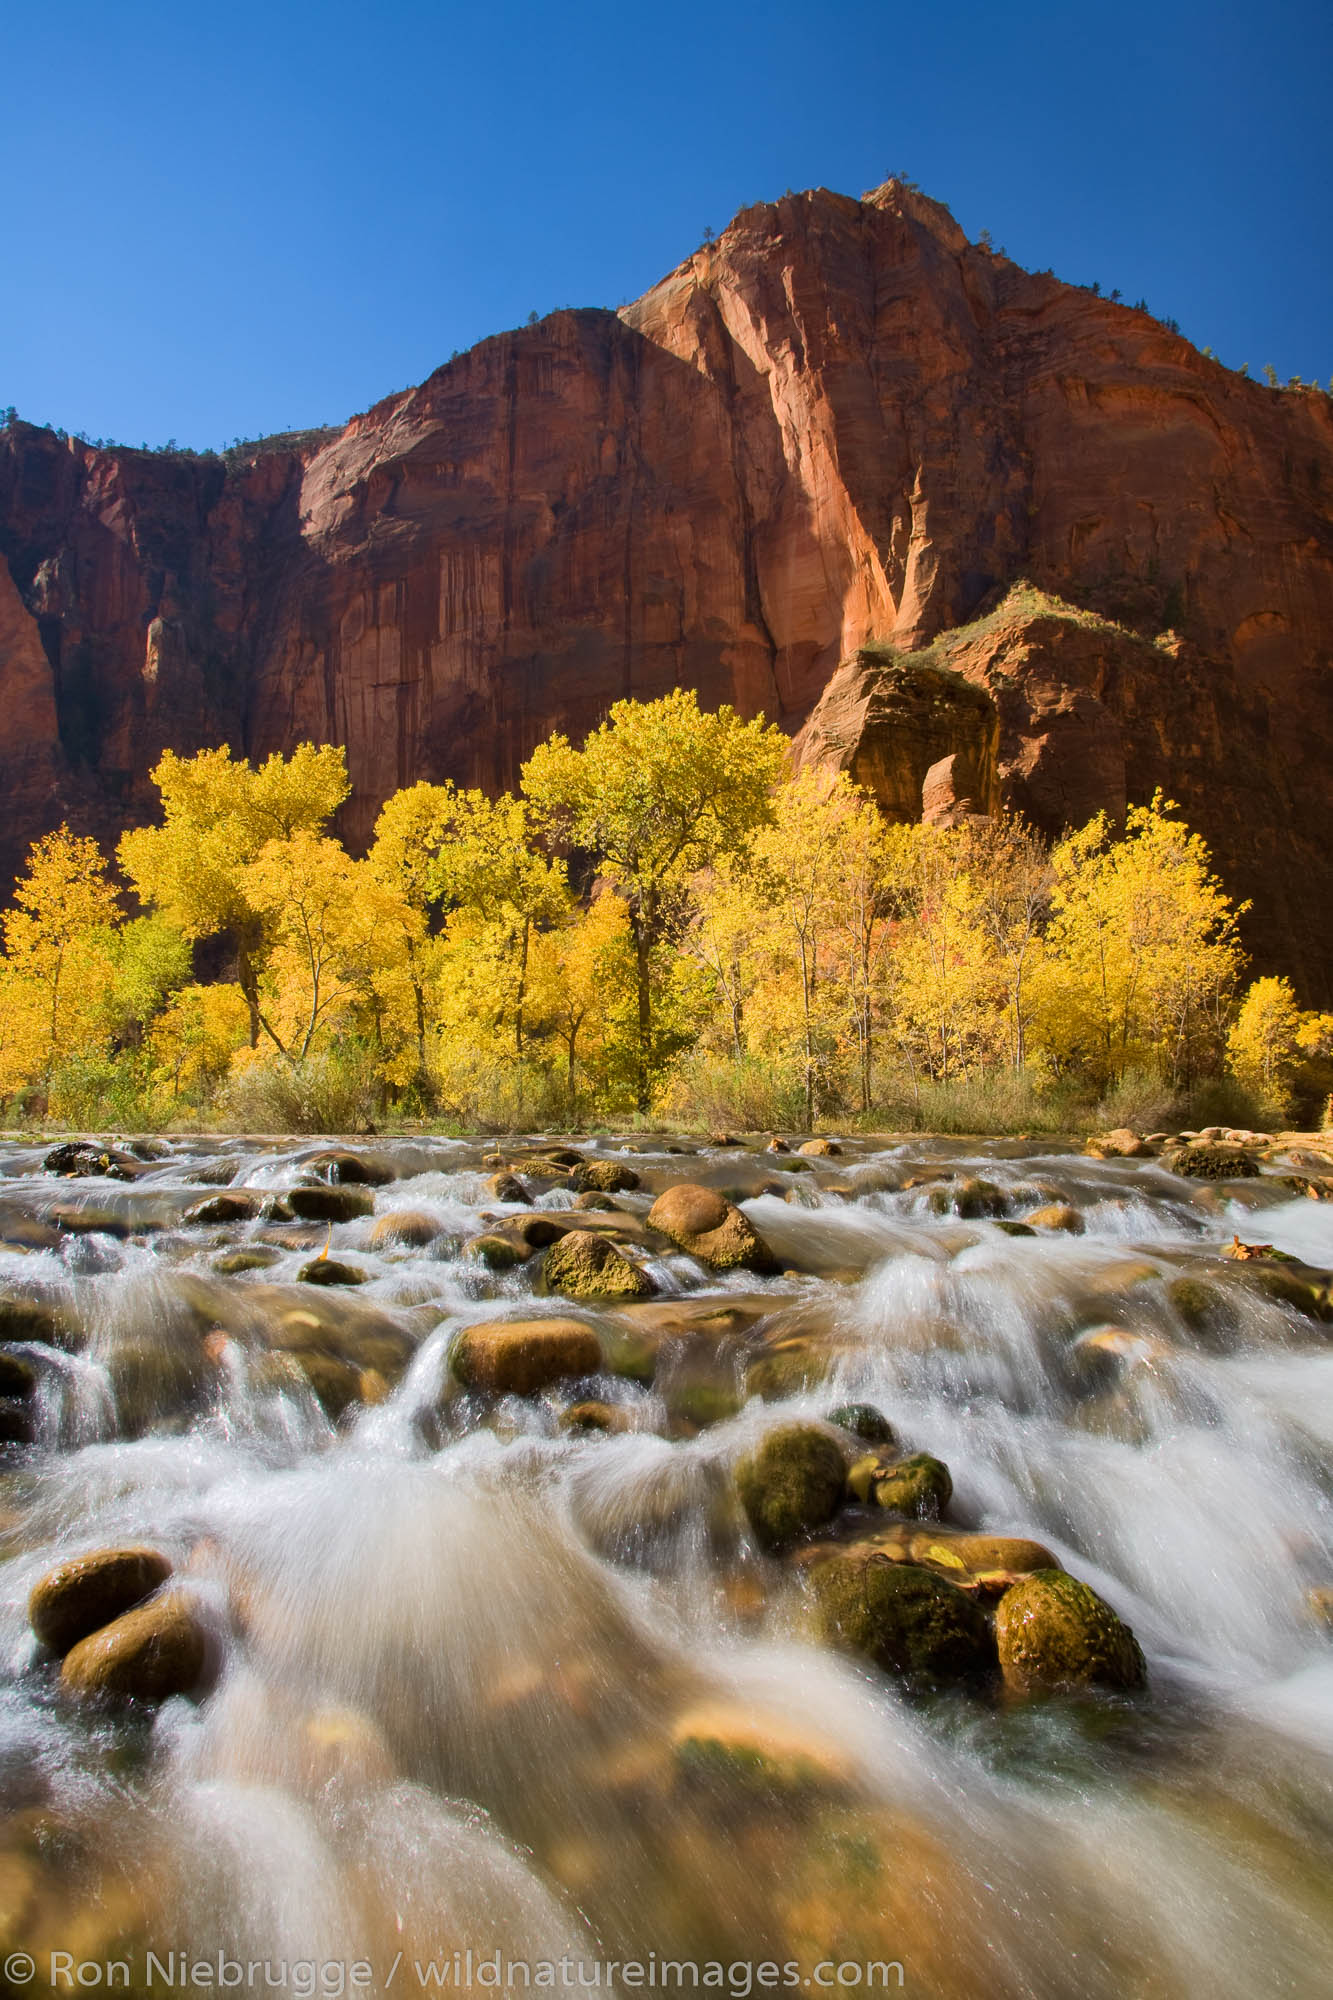 The Virgin River at the Temple of Sinawava, Zion National Park, Utah.